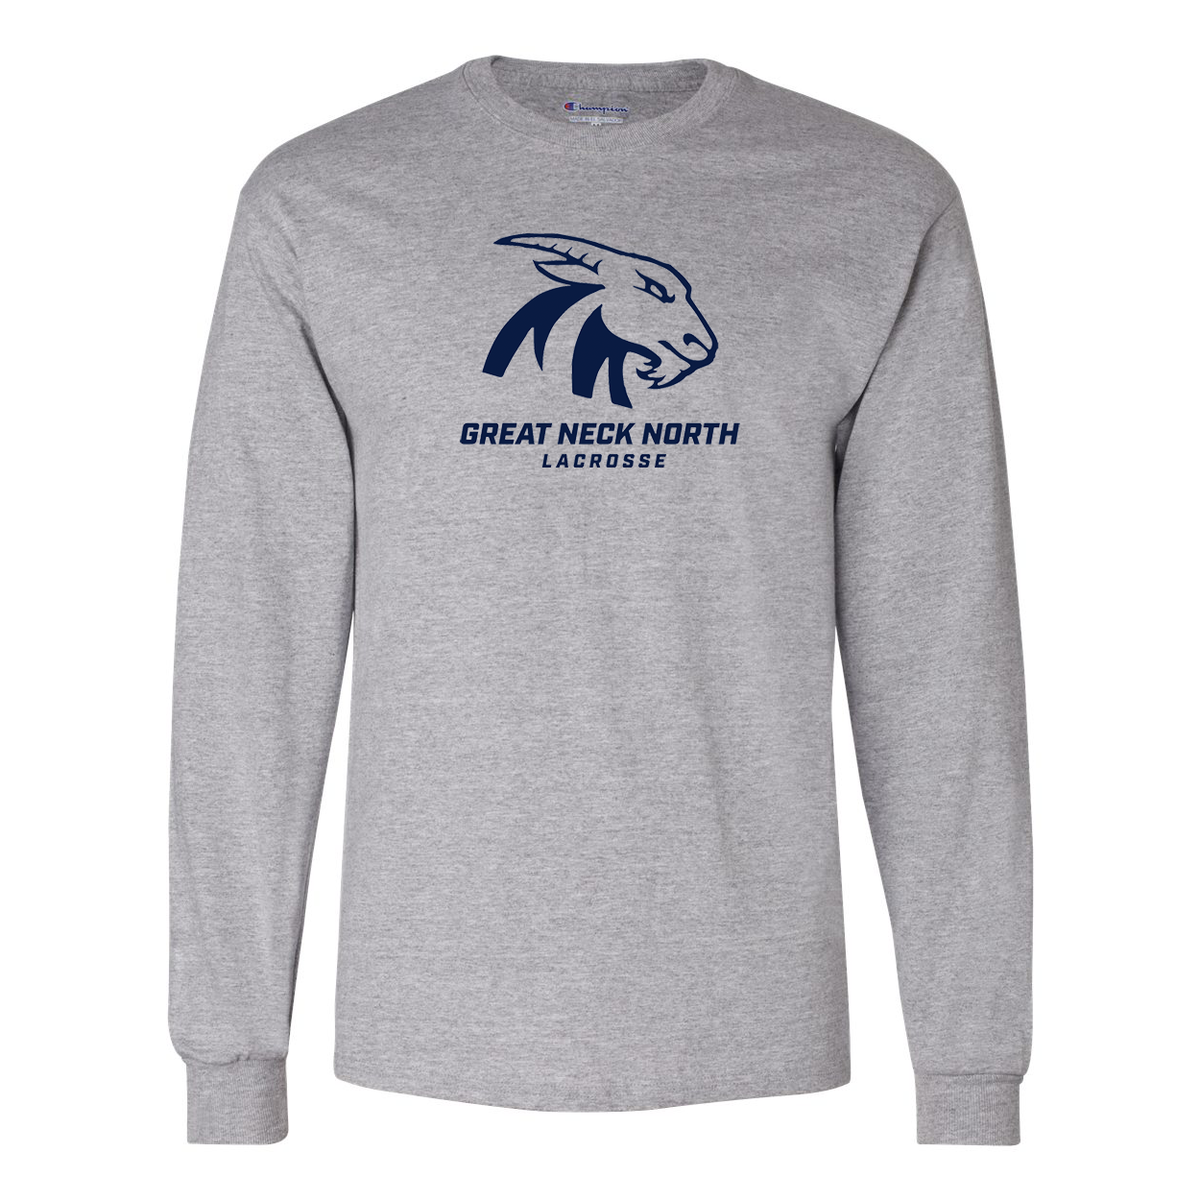 Great Neck North HS Lacrosse Champion Long Sleeve T-Shirt